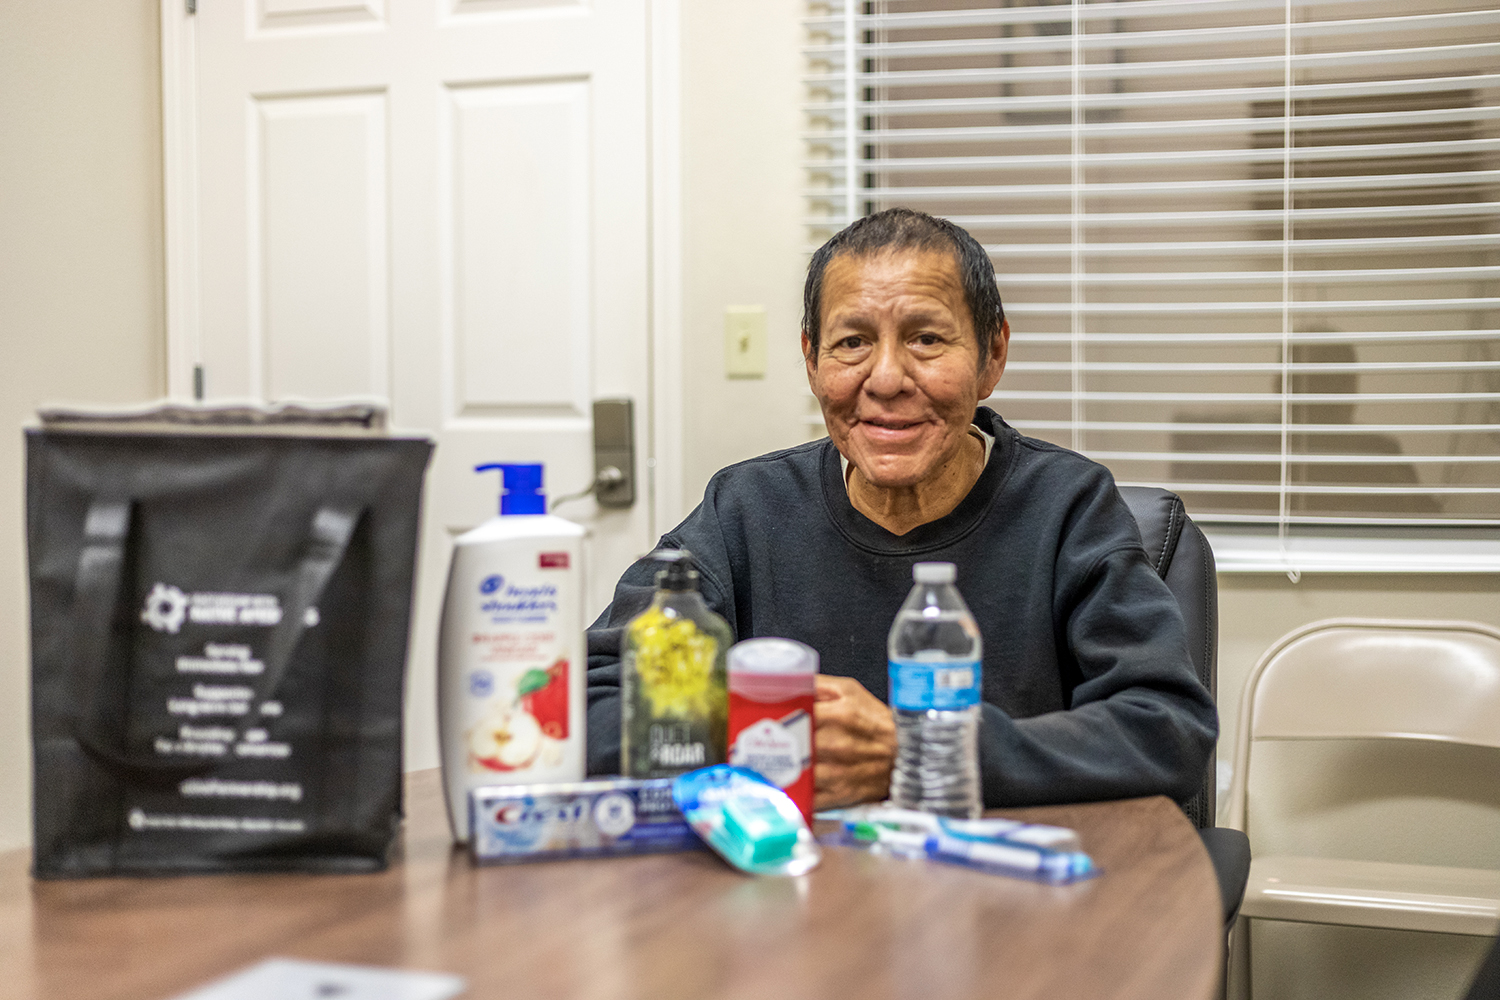 A Navajo Veteran’s Adjustment to Assisted Living